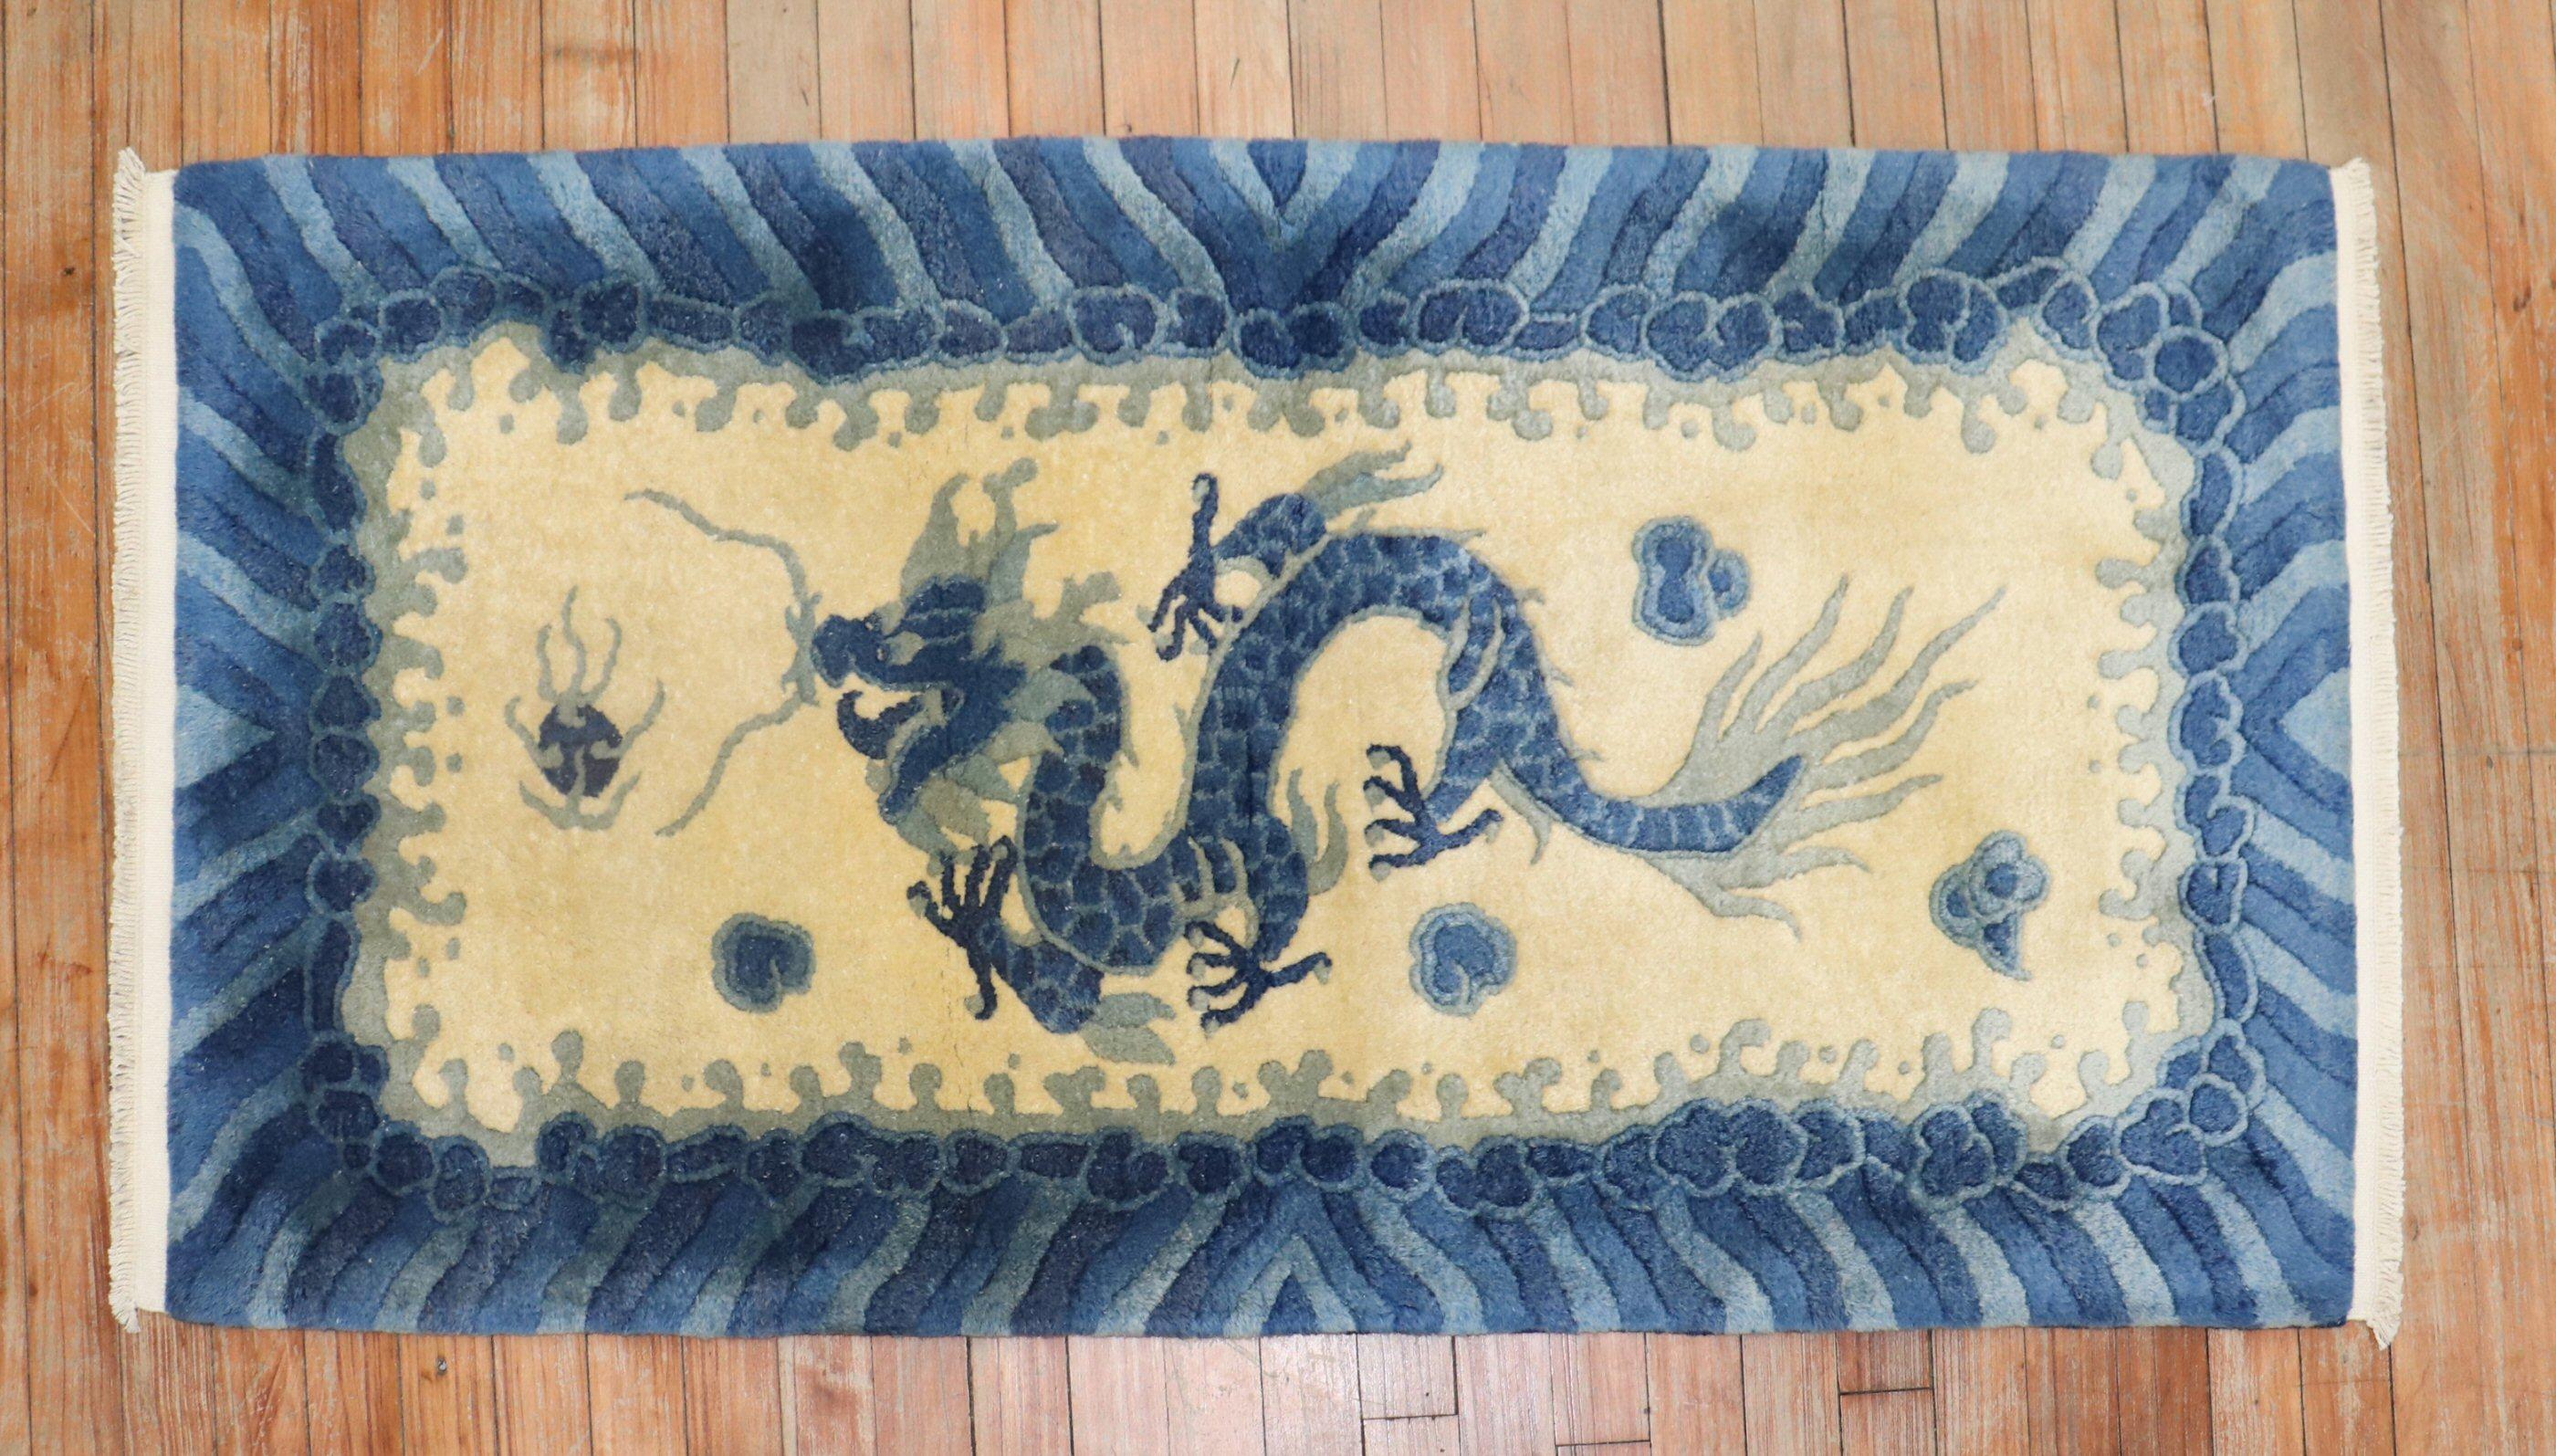 A full pile 3rd quarter of the 20th-century Chinese rug with a blue dragon on a yellow-beige field. Accents in blue.

Measures: 2'3